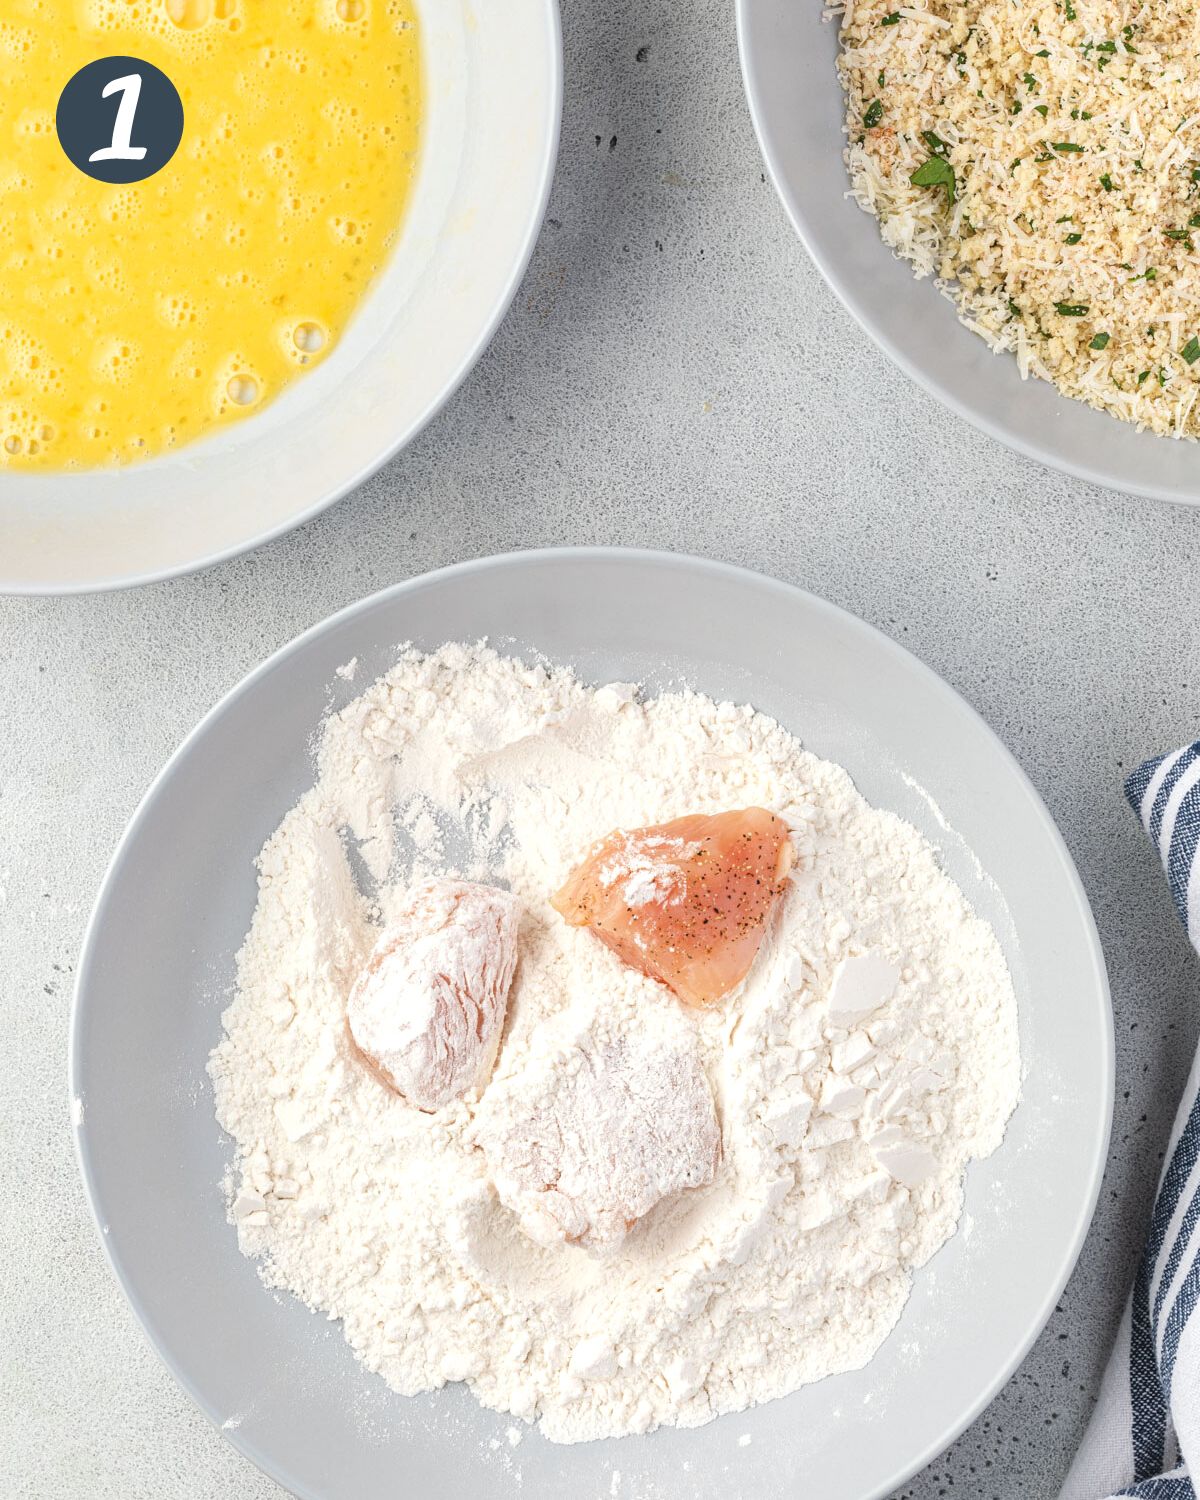 A shallow grey bowl of flour with 3 pieces of chicken, 2 coated in flour and one plain.